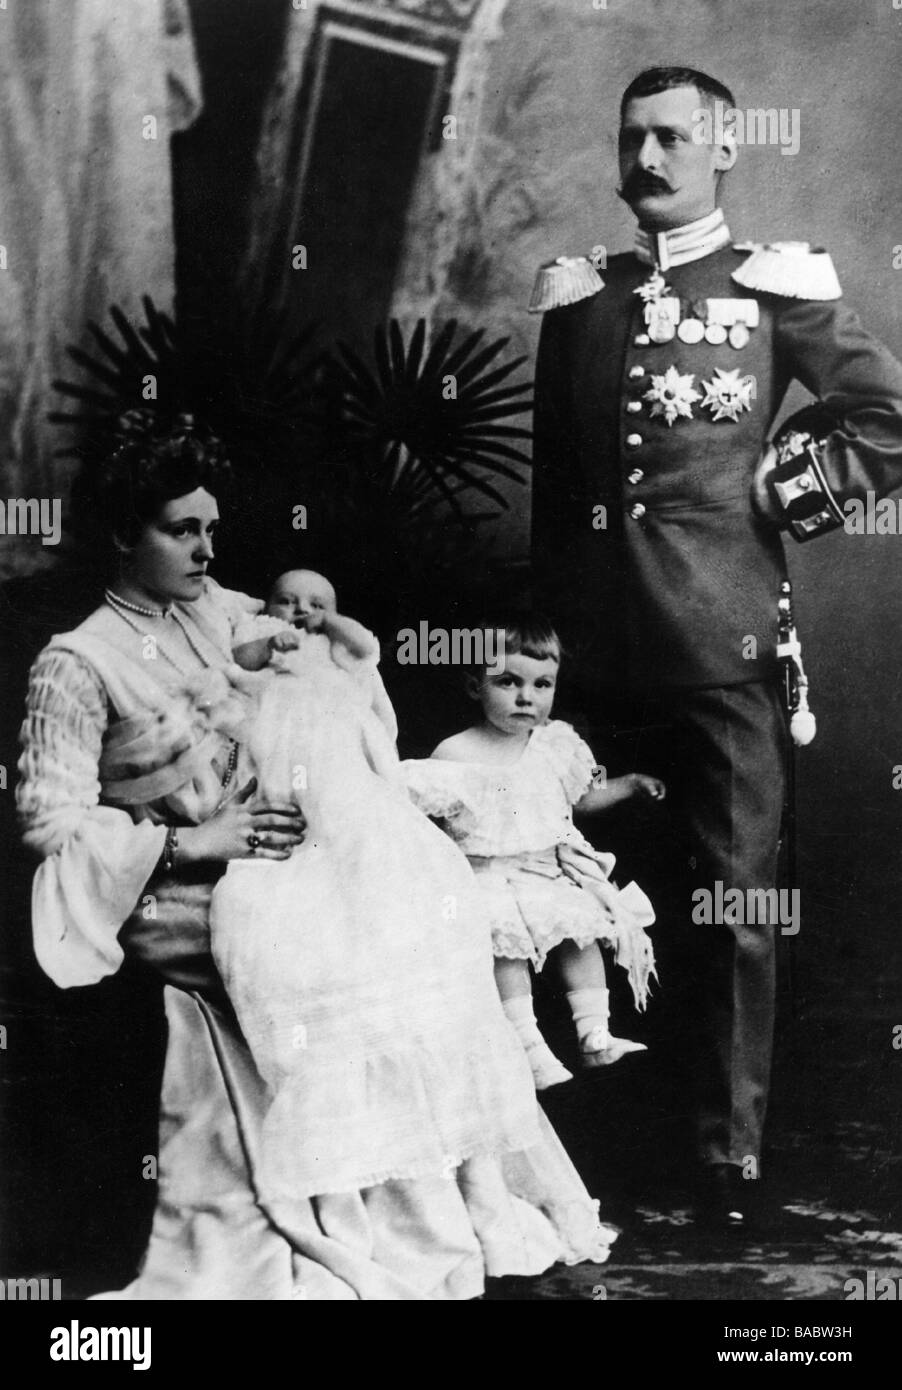 Rupprecht, 18.5.1869 - 2.8.1955, Crown Prince of Bavaria  5.11.1913 - 9.11.1918, with wife Marie Gabrielle, son Luitpold and daugther Irmingard, 1902, Stock Photo